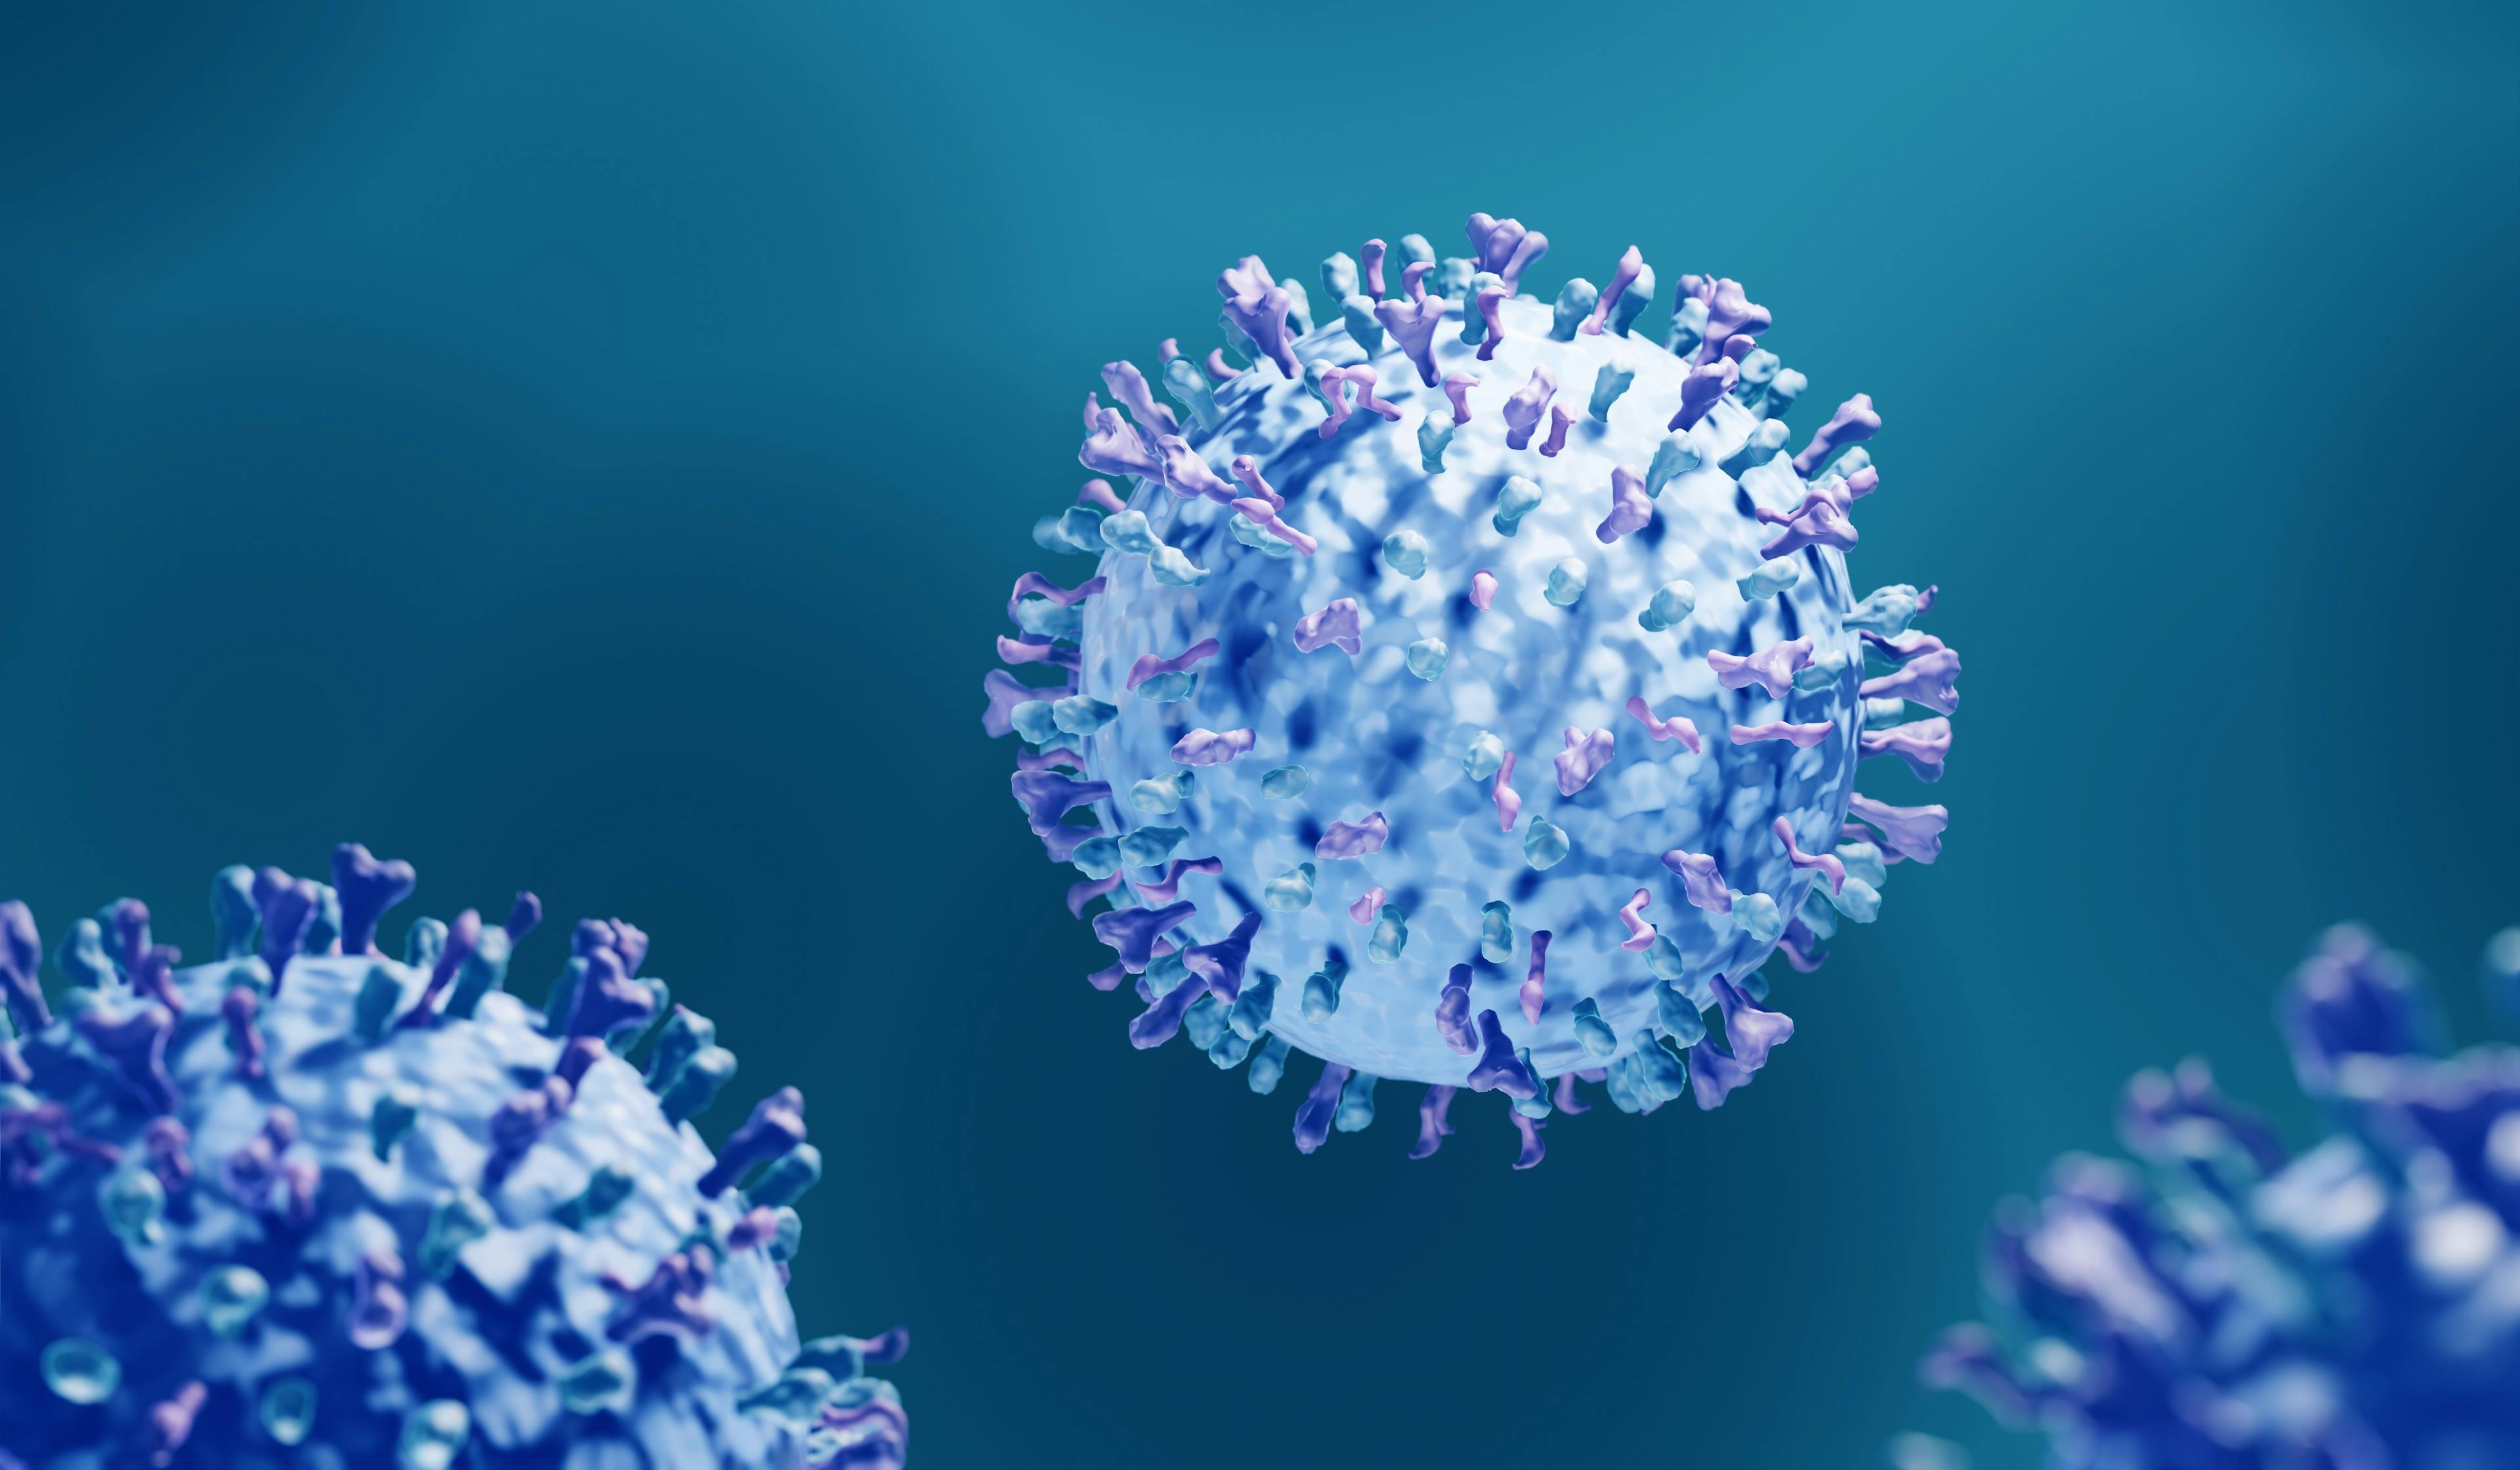 Infectious viruses such as respiratory syncytial virus (RSV) causing respiratory infections | Image Credit: Artur - stock.adobe.com